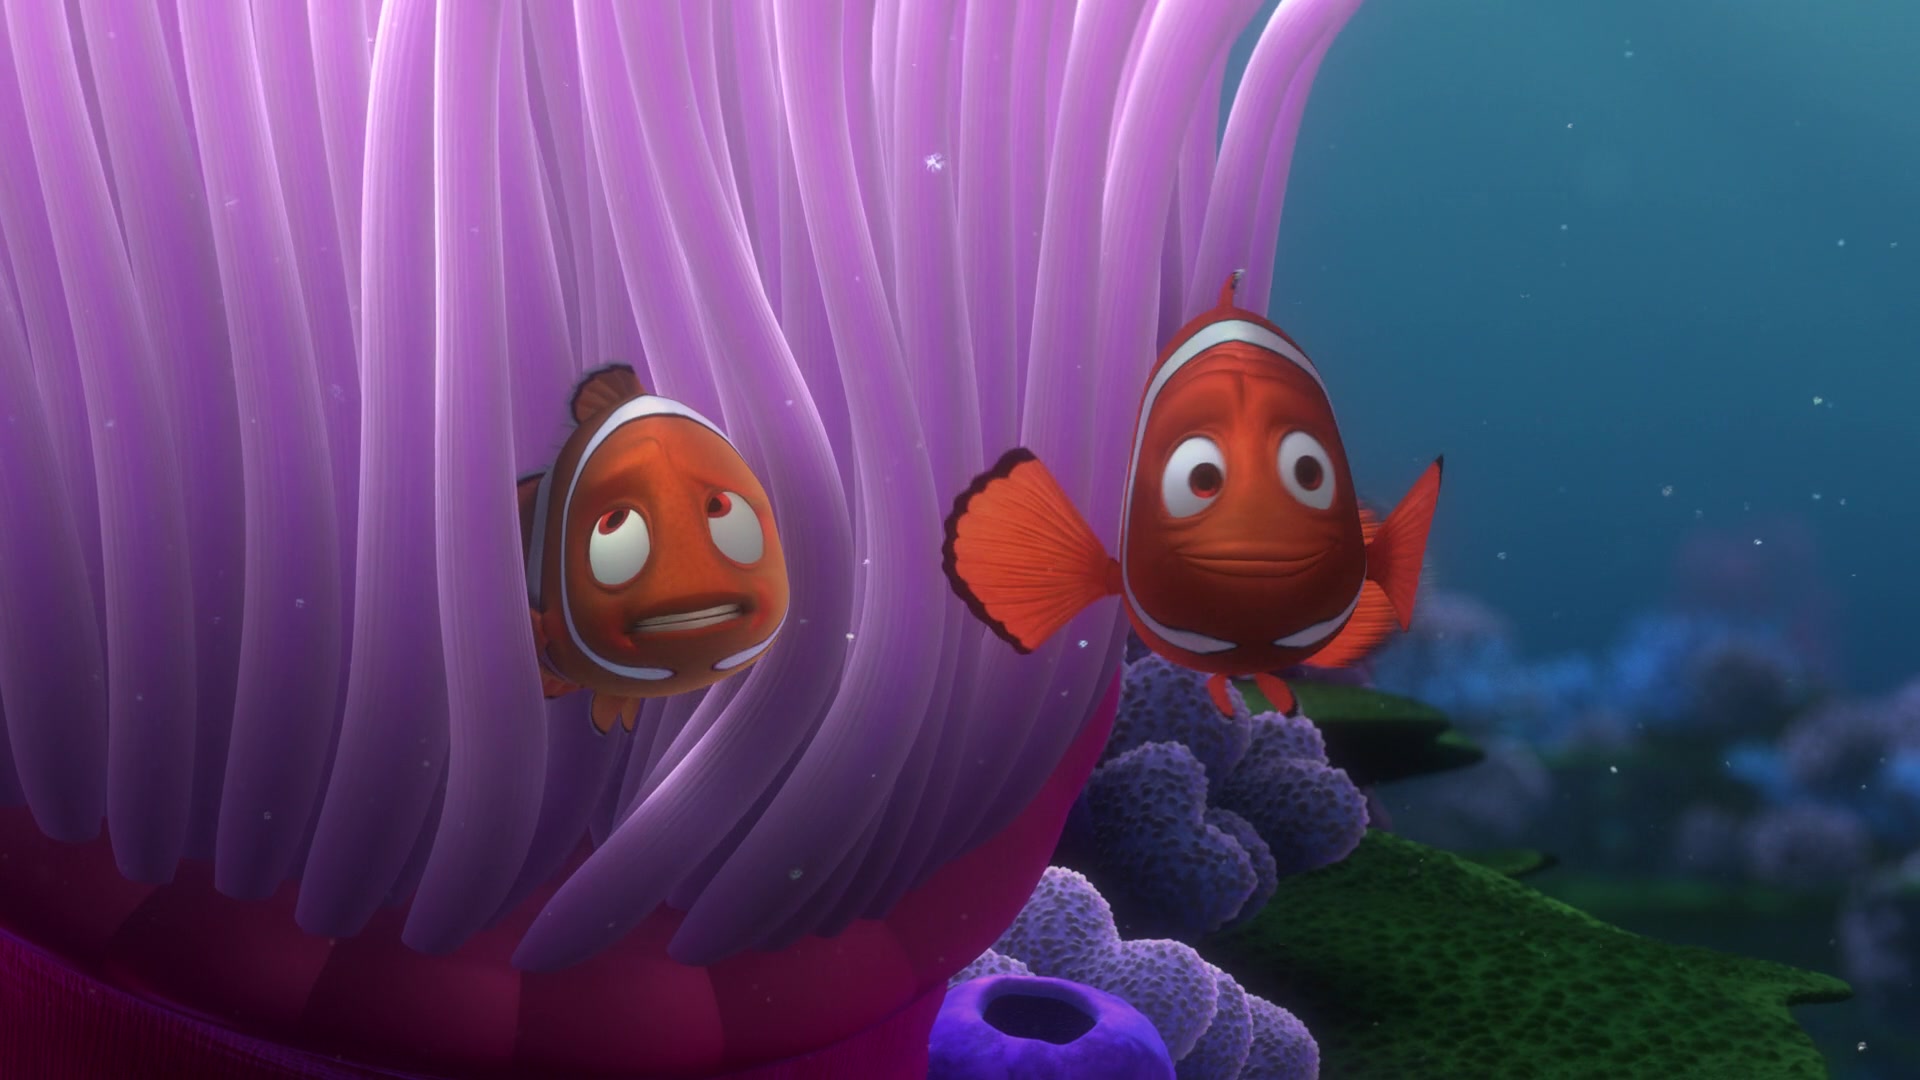 Finding Nemo (2003) Images. 